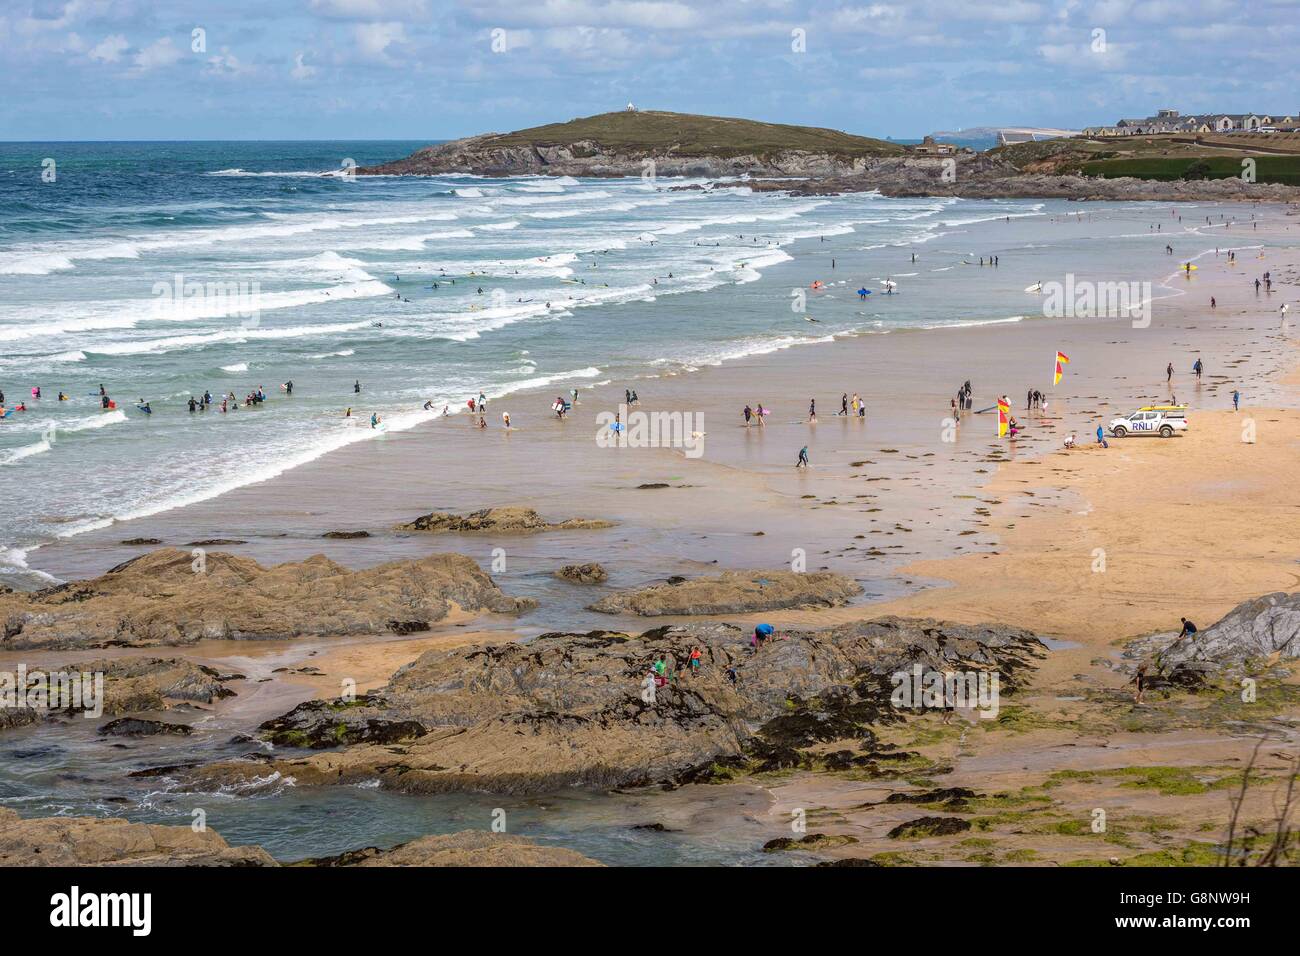 A crowd of people on the beach by the sea on Fistral Beach, Newquay, Cornwall, UK Stock Photo